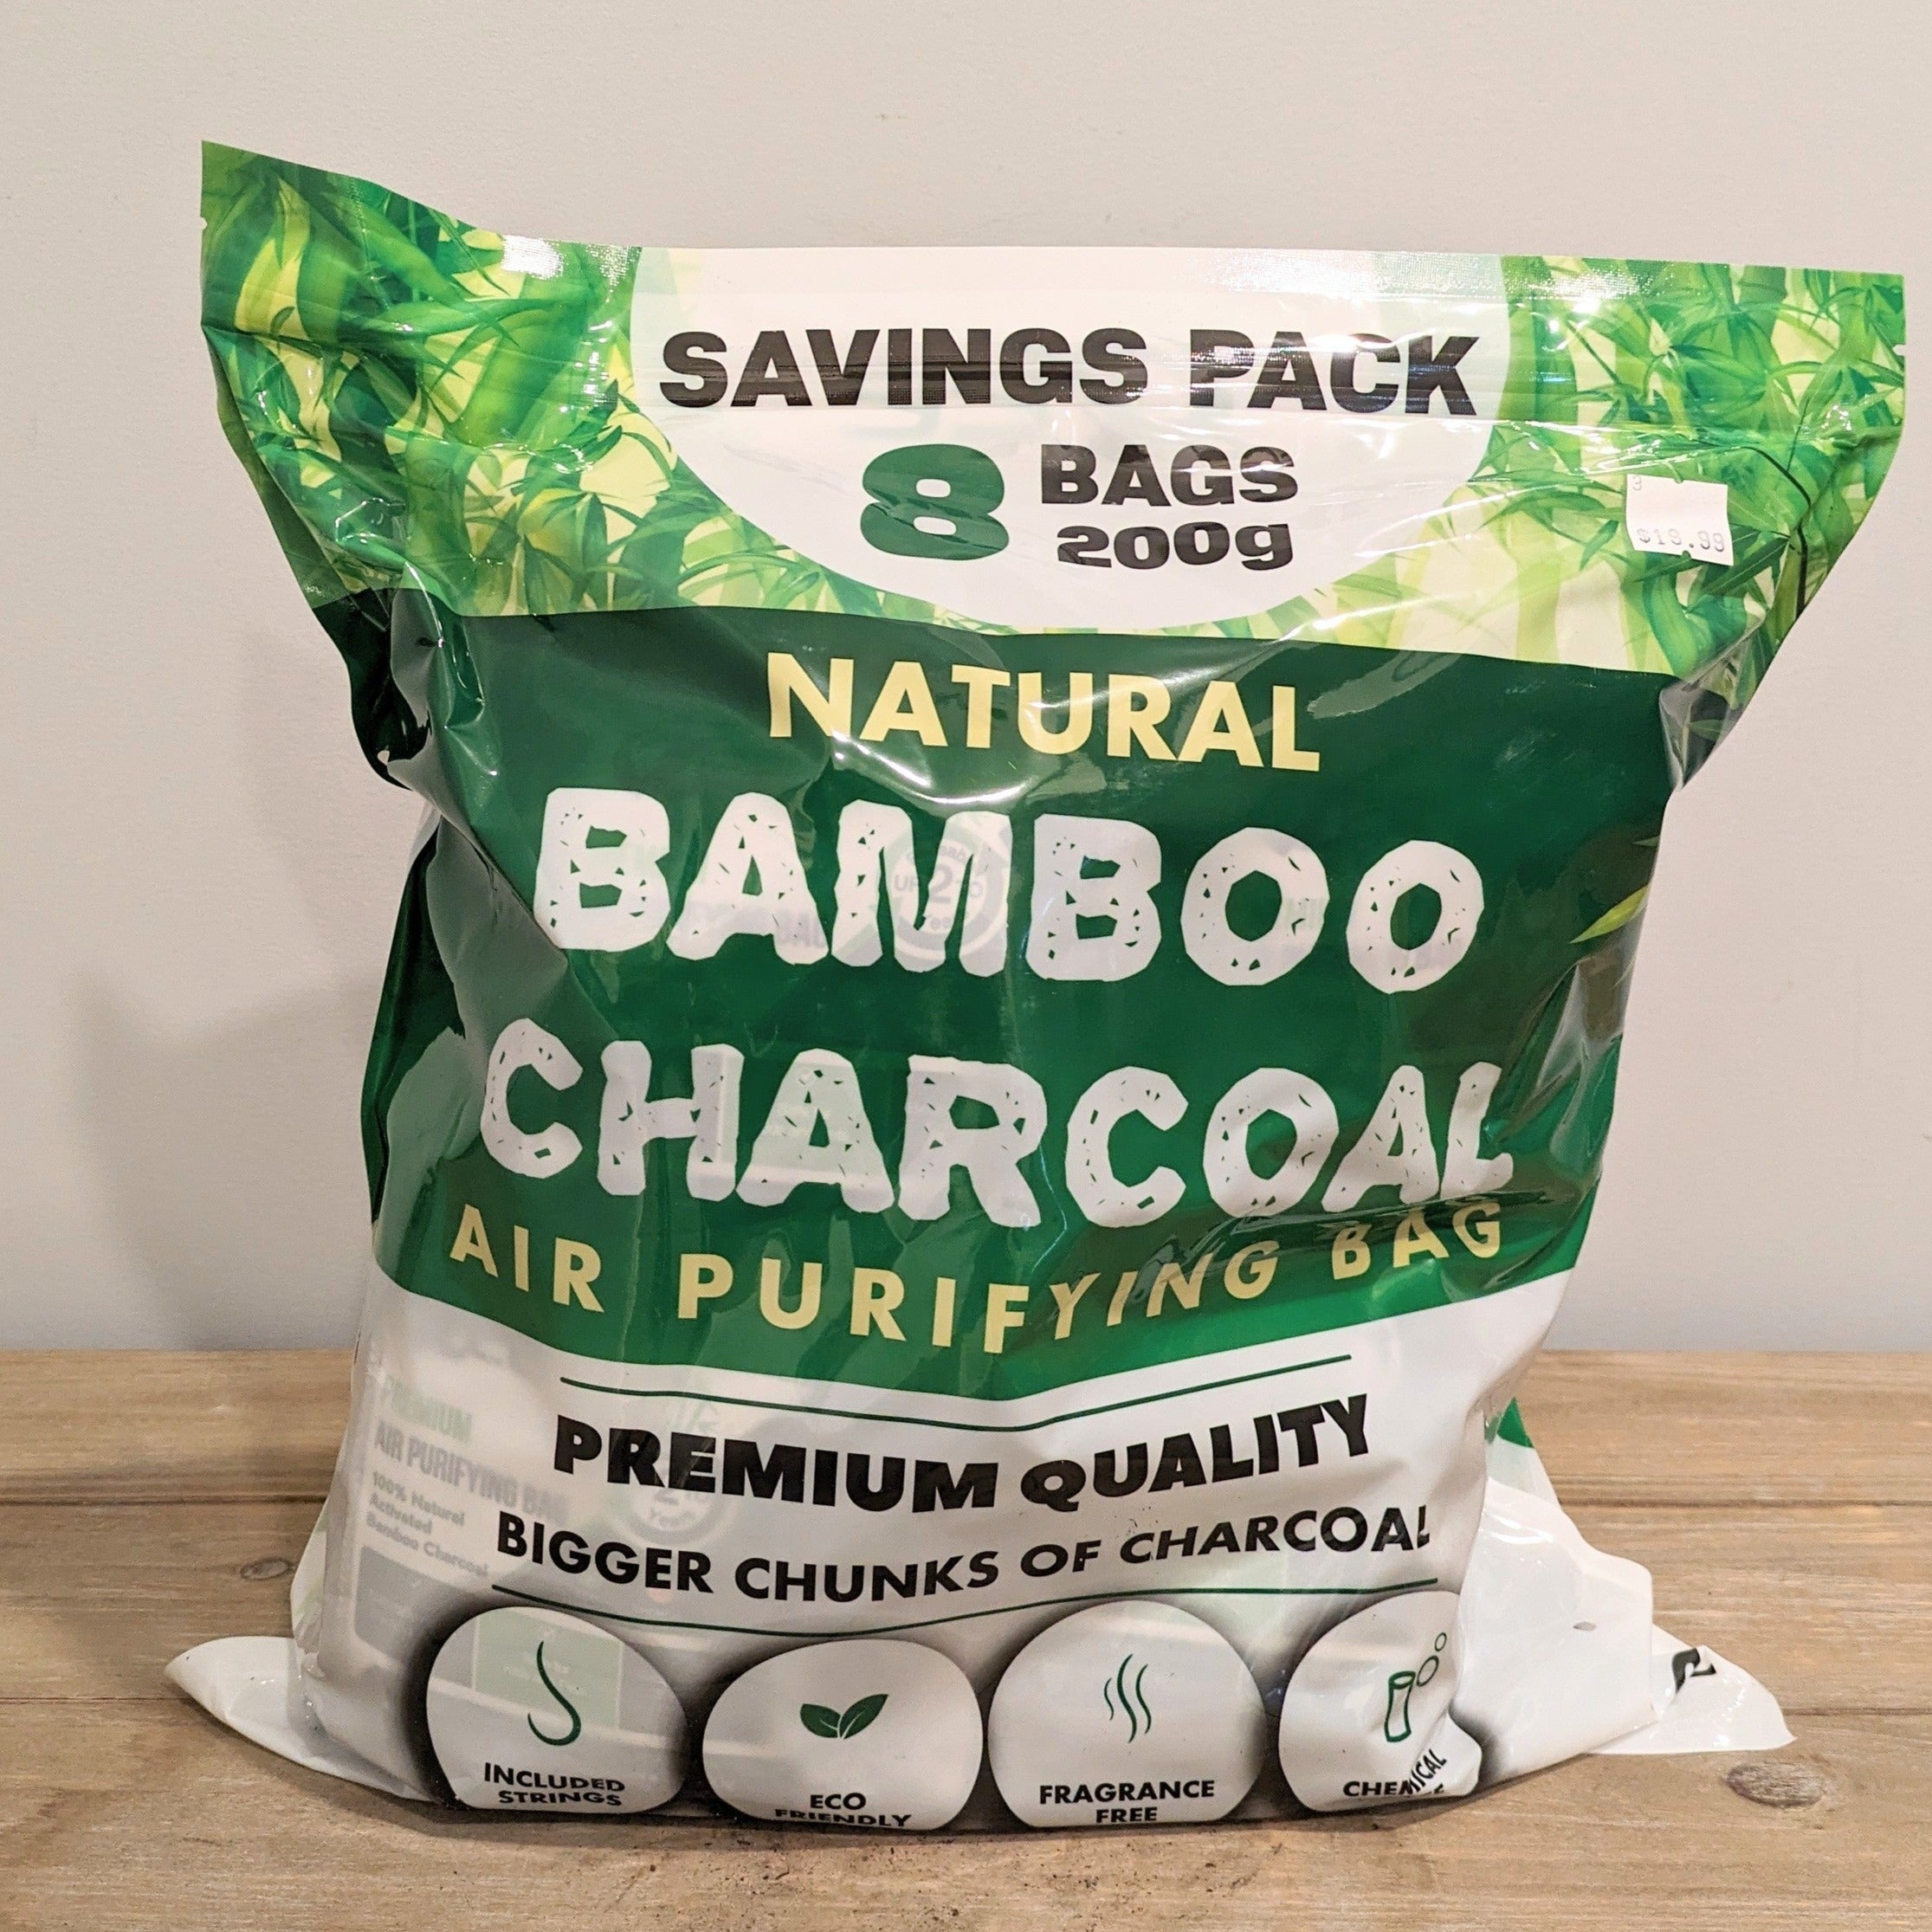 8pack of Natural Bamboo Charcoal bags